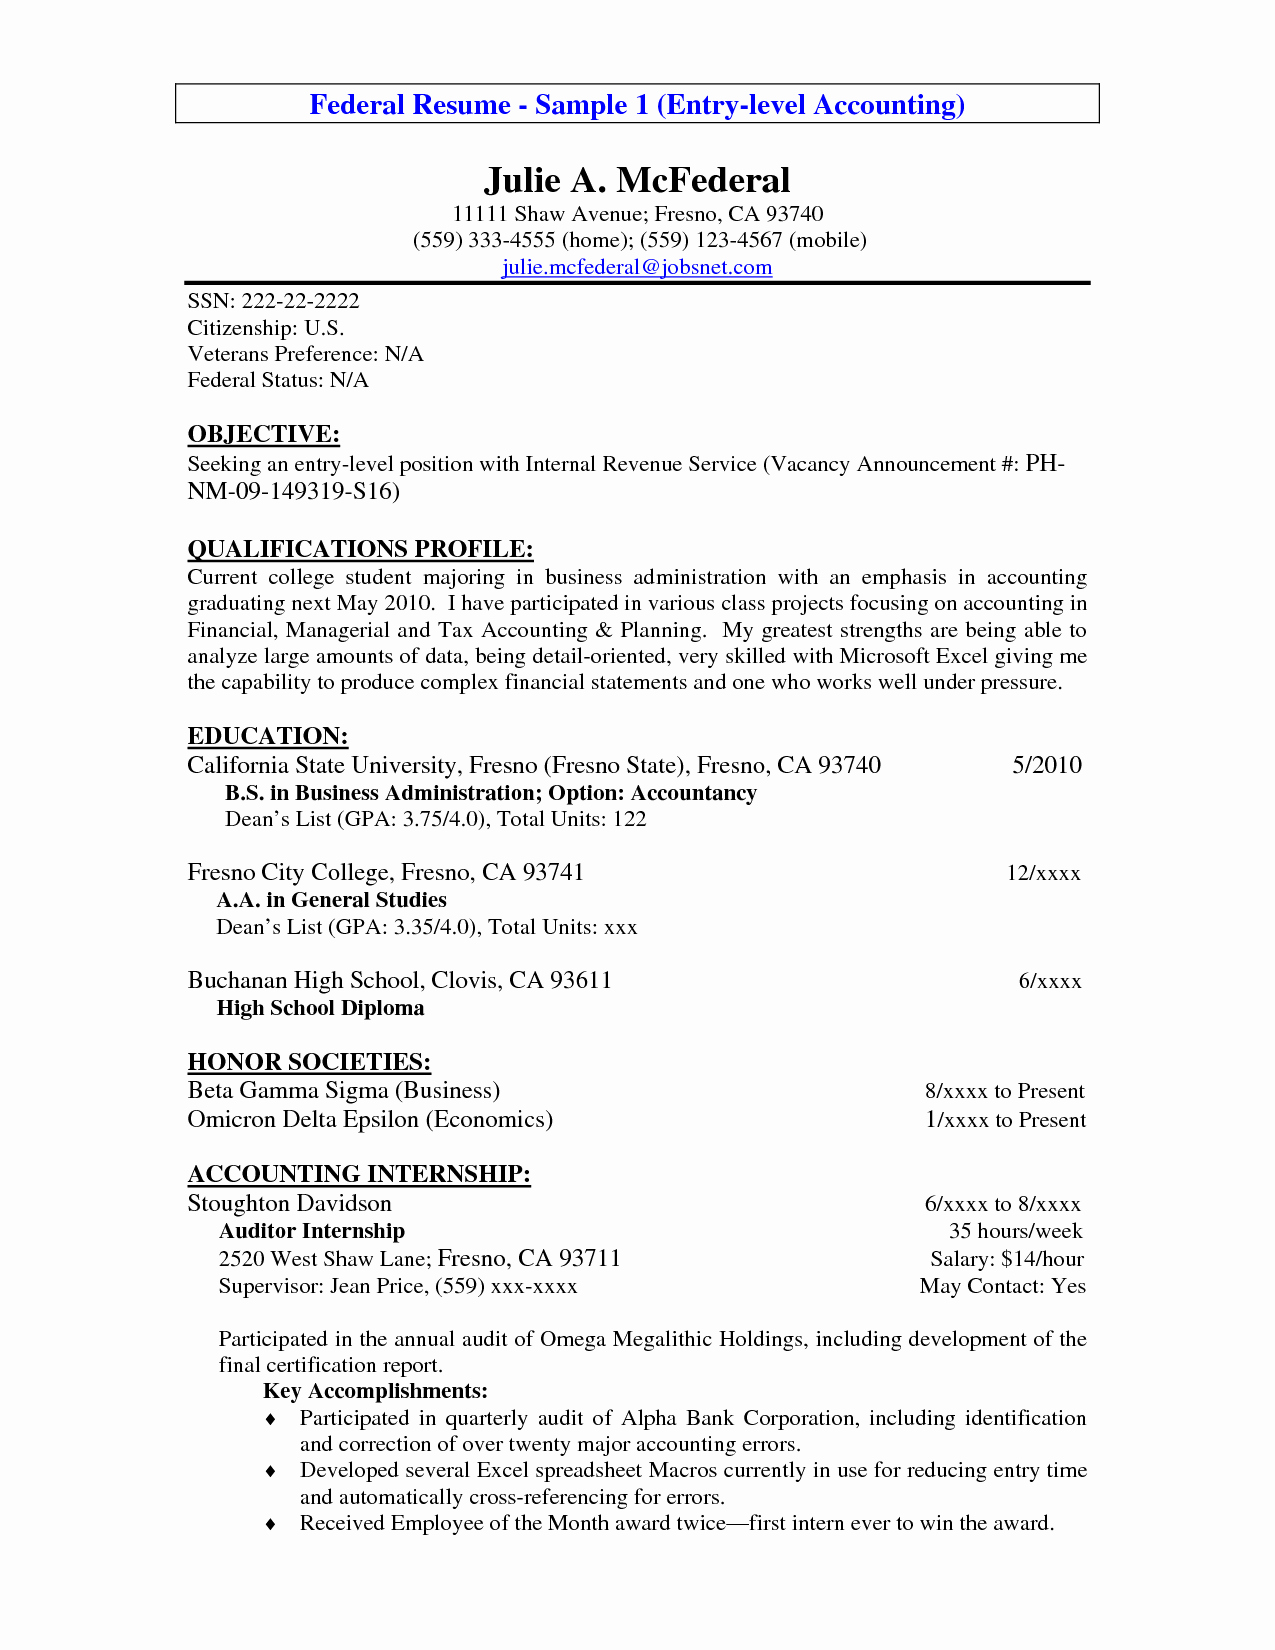 Pin by Resume Objectives On Accounting Resume Objectives